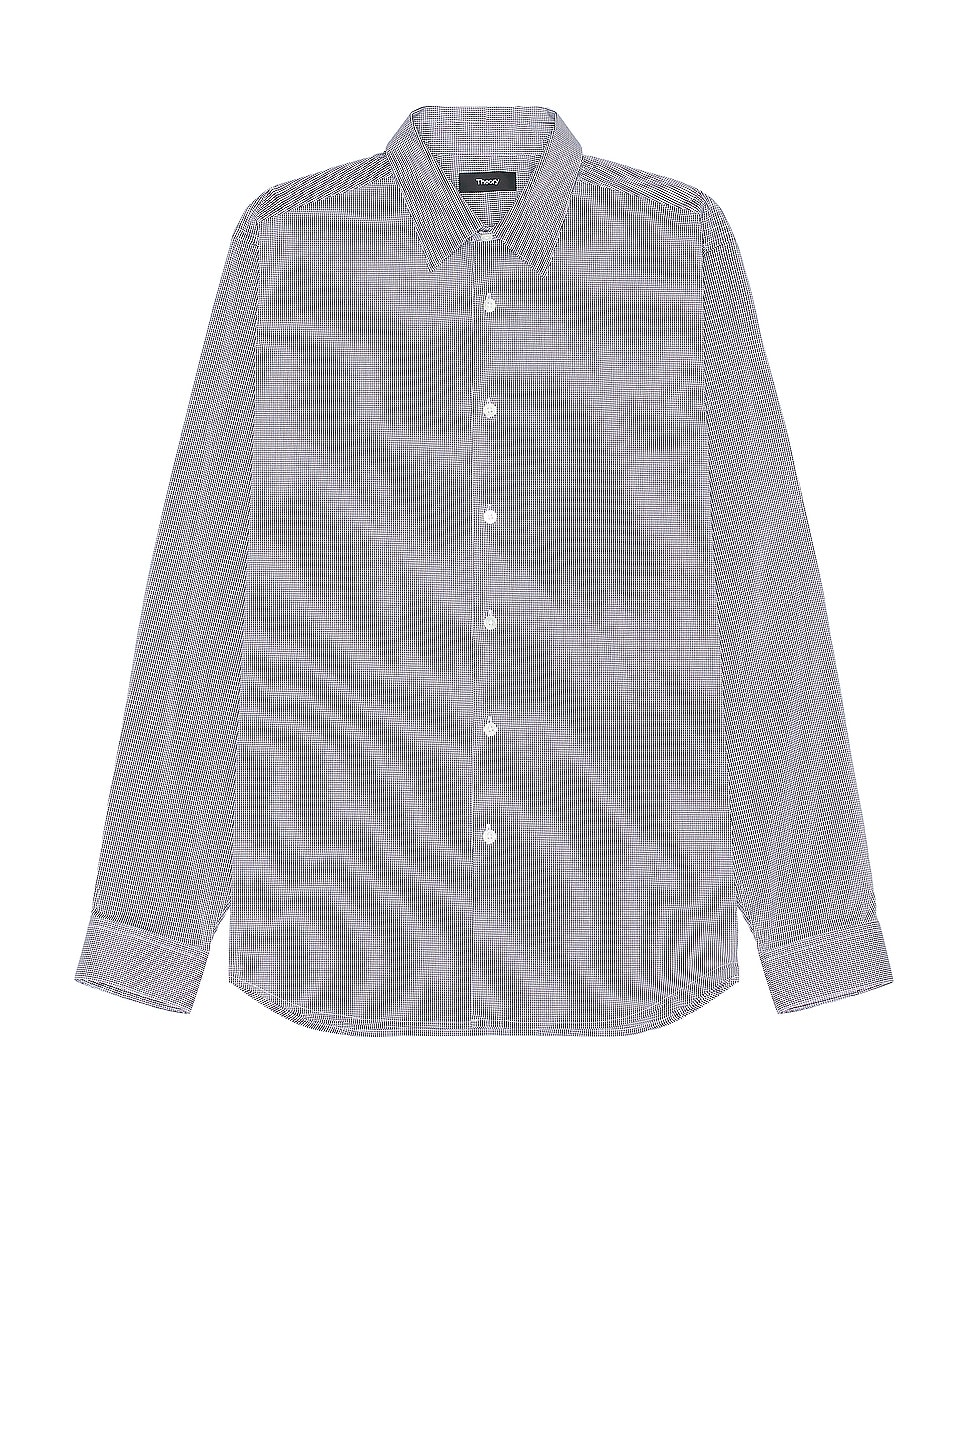 Image 1 of Theory Irving Long Sleeve Shirt in White & Navy